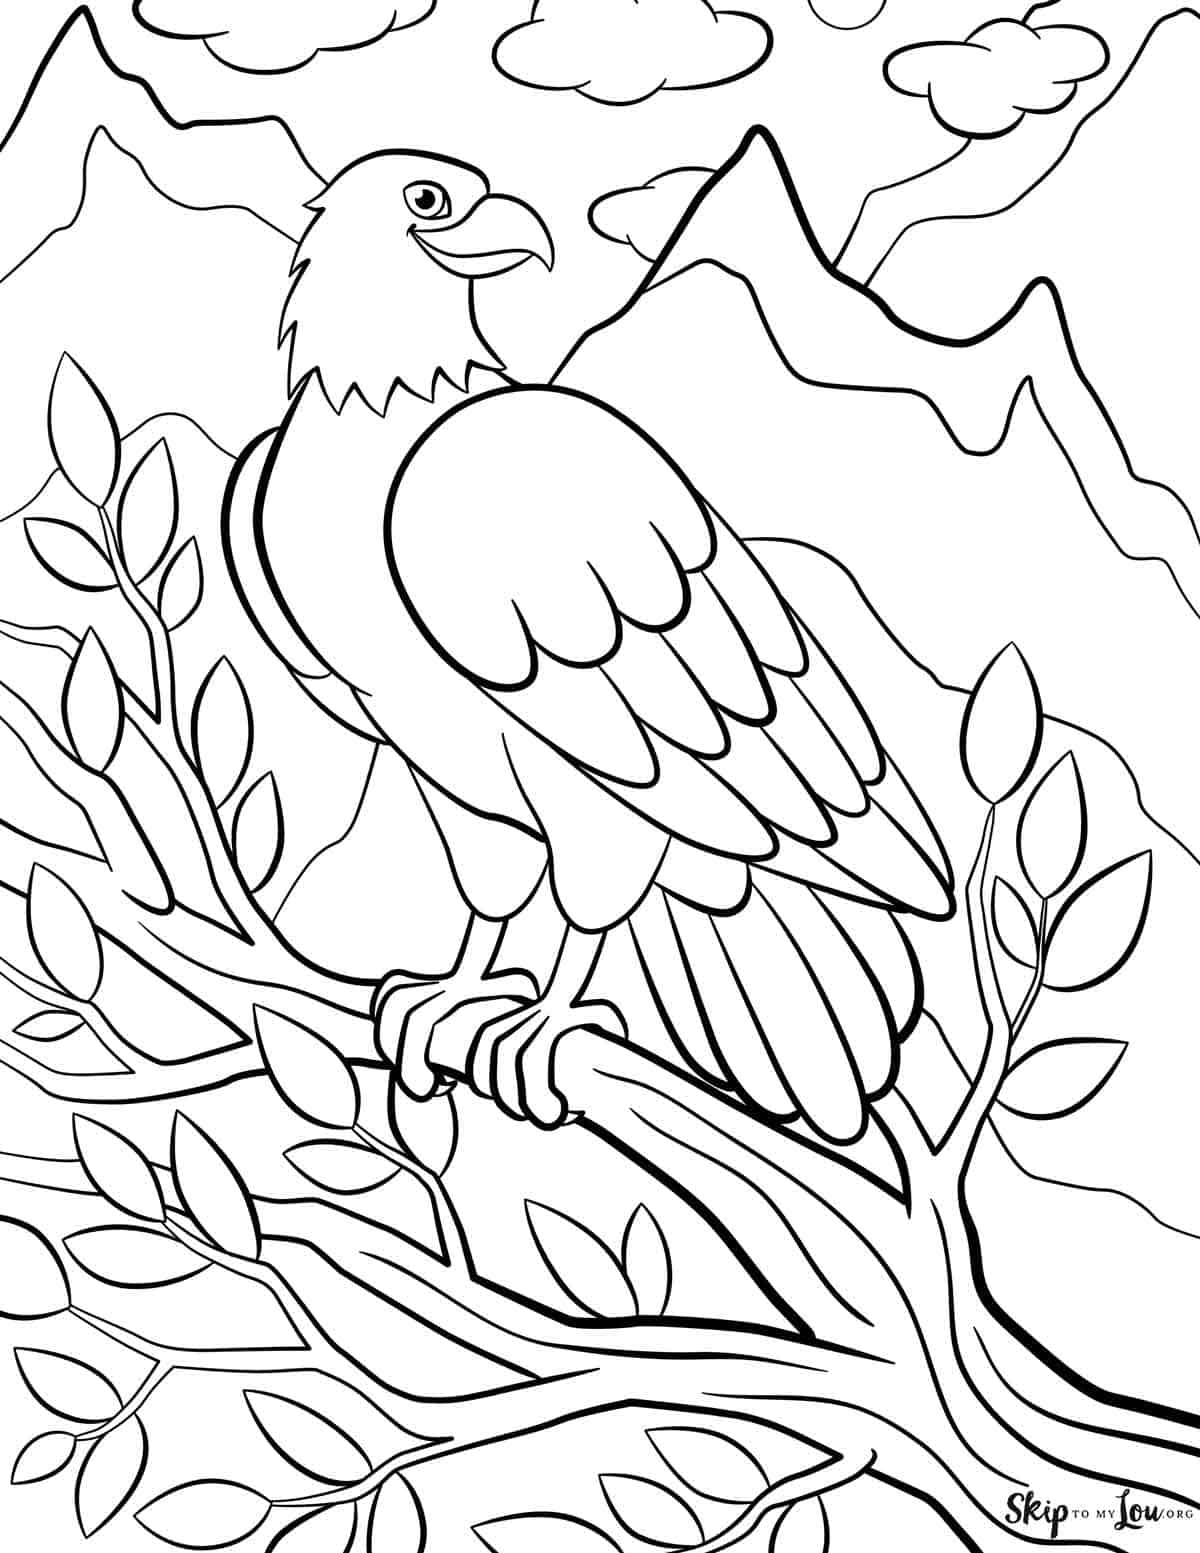 Bald eagle coloring pages skip to my lou